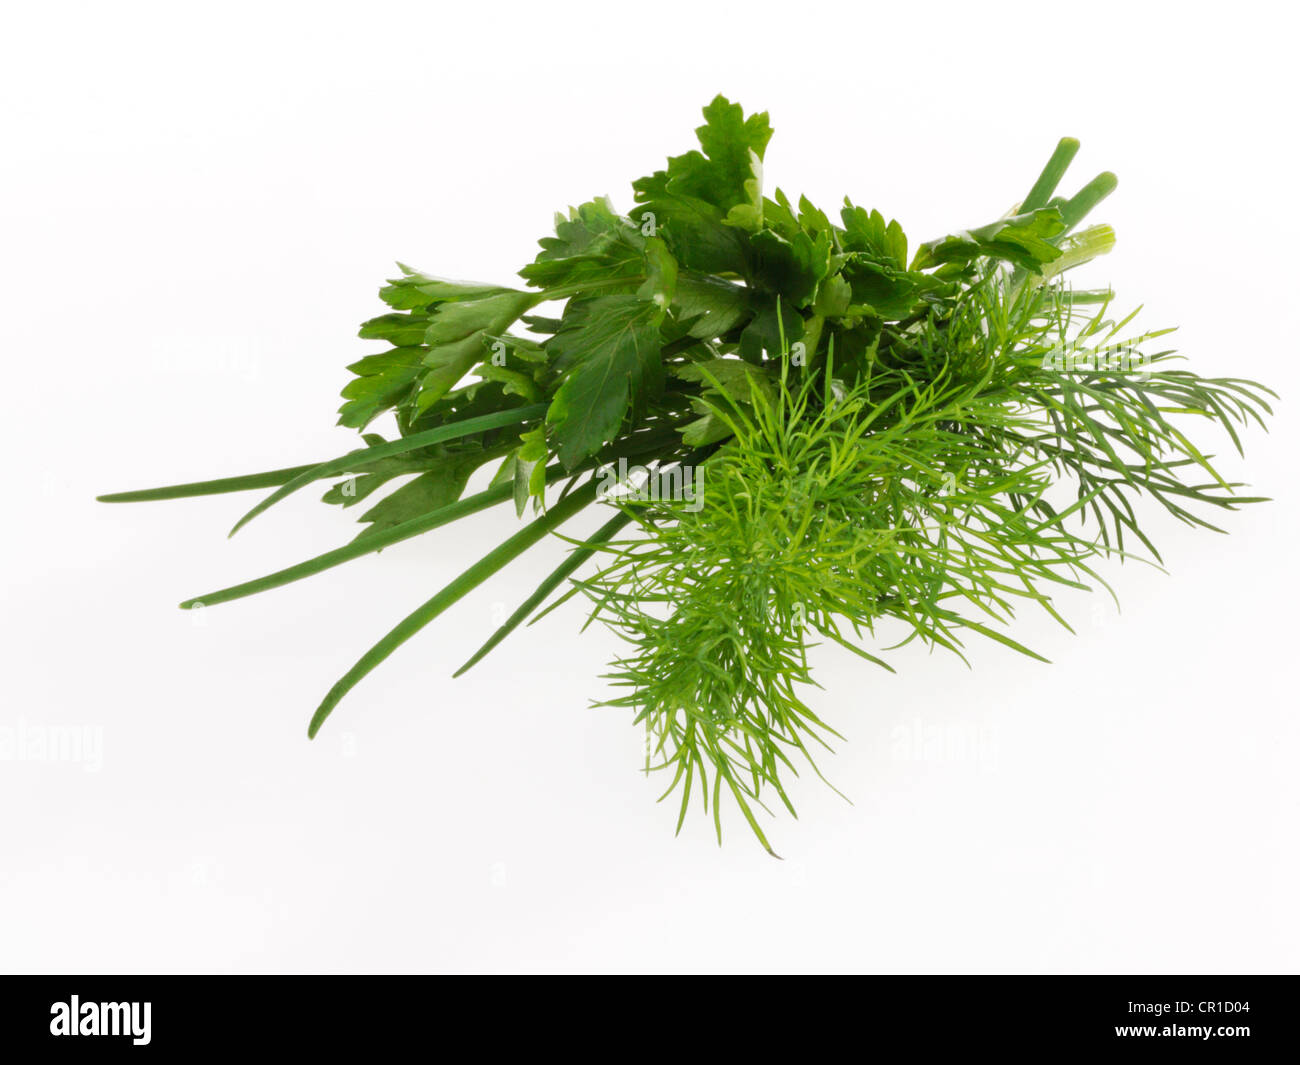 Herbs, chives, dill, parsley Stock Photo